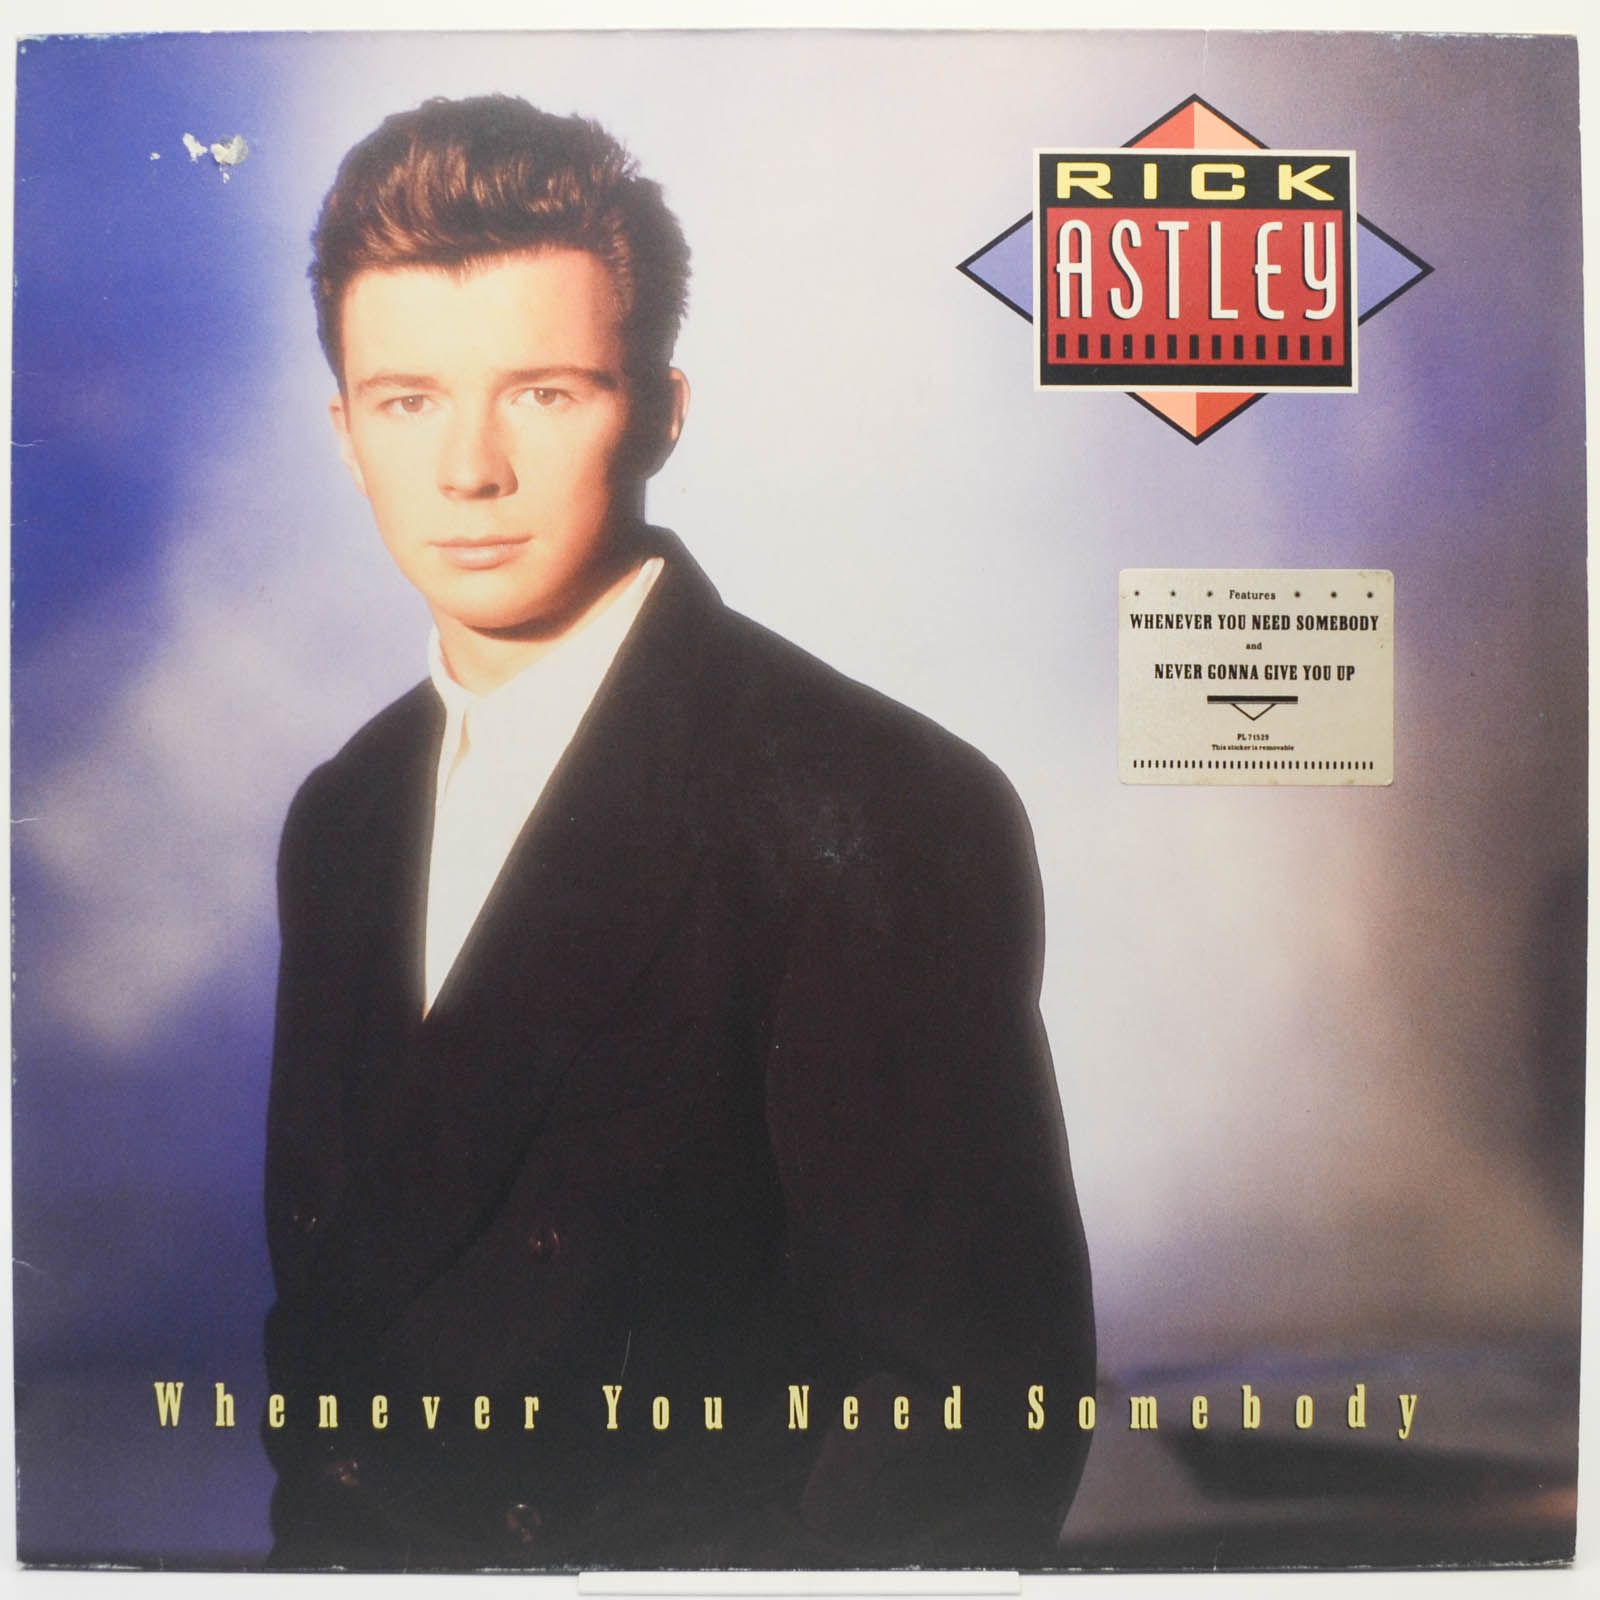 Rick Astley — Whenever You Need Somebody, 1987